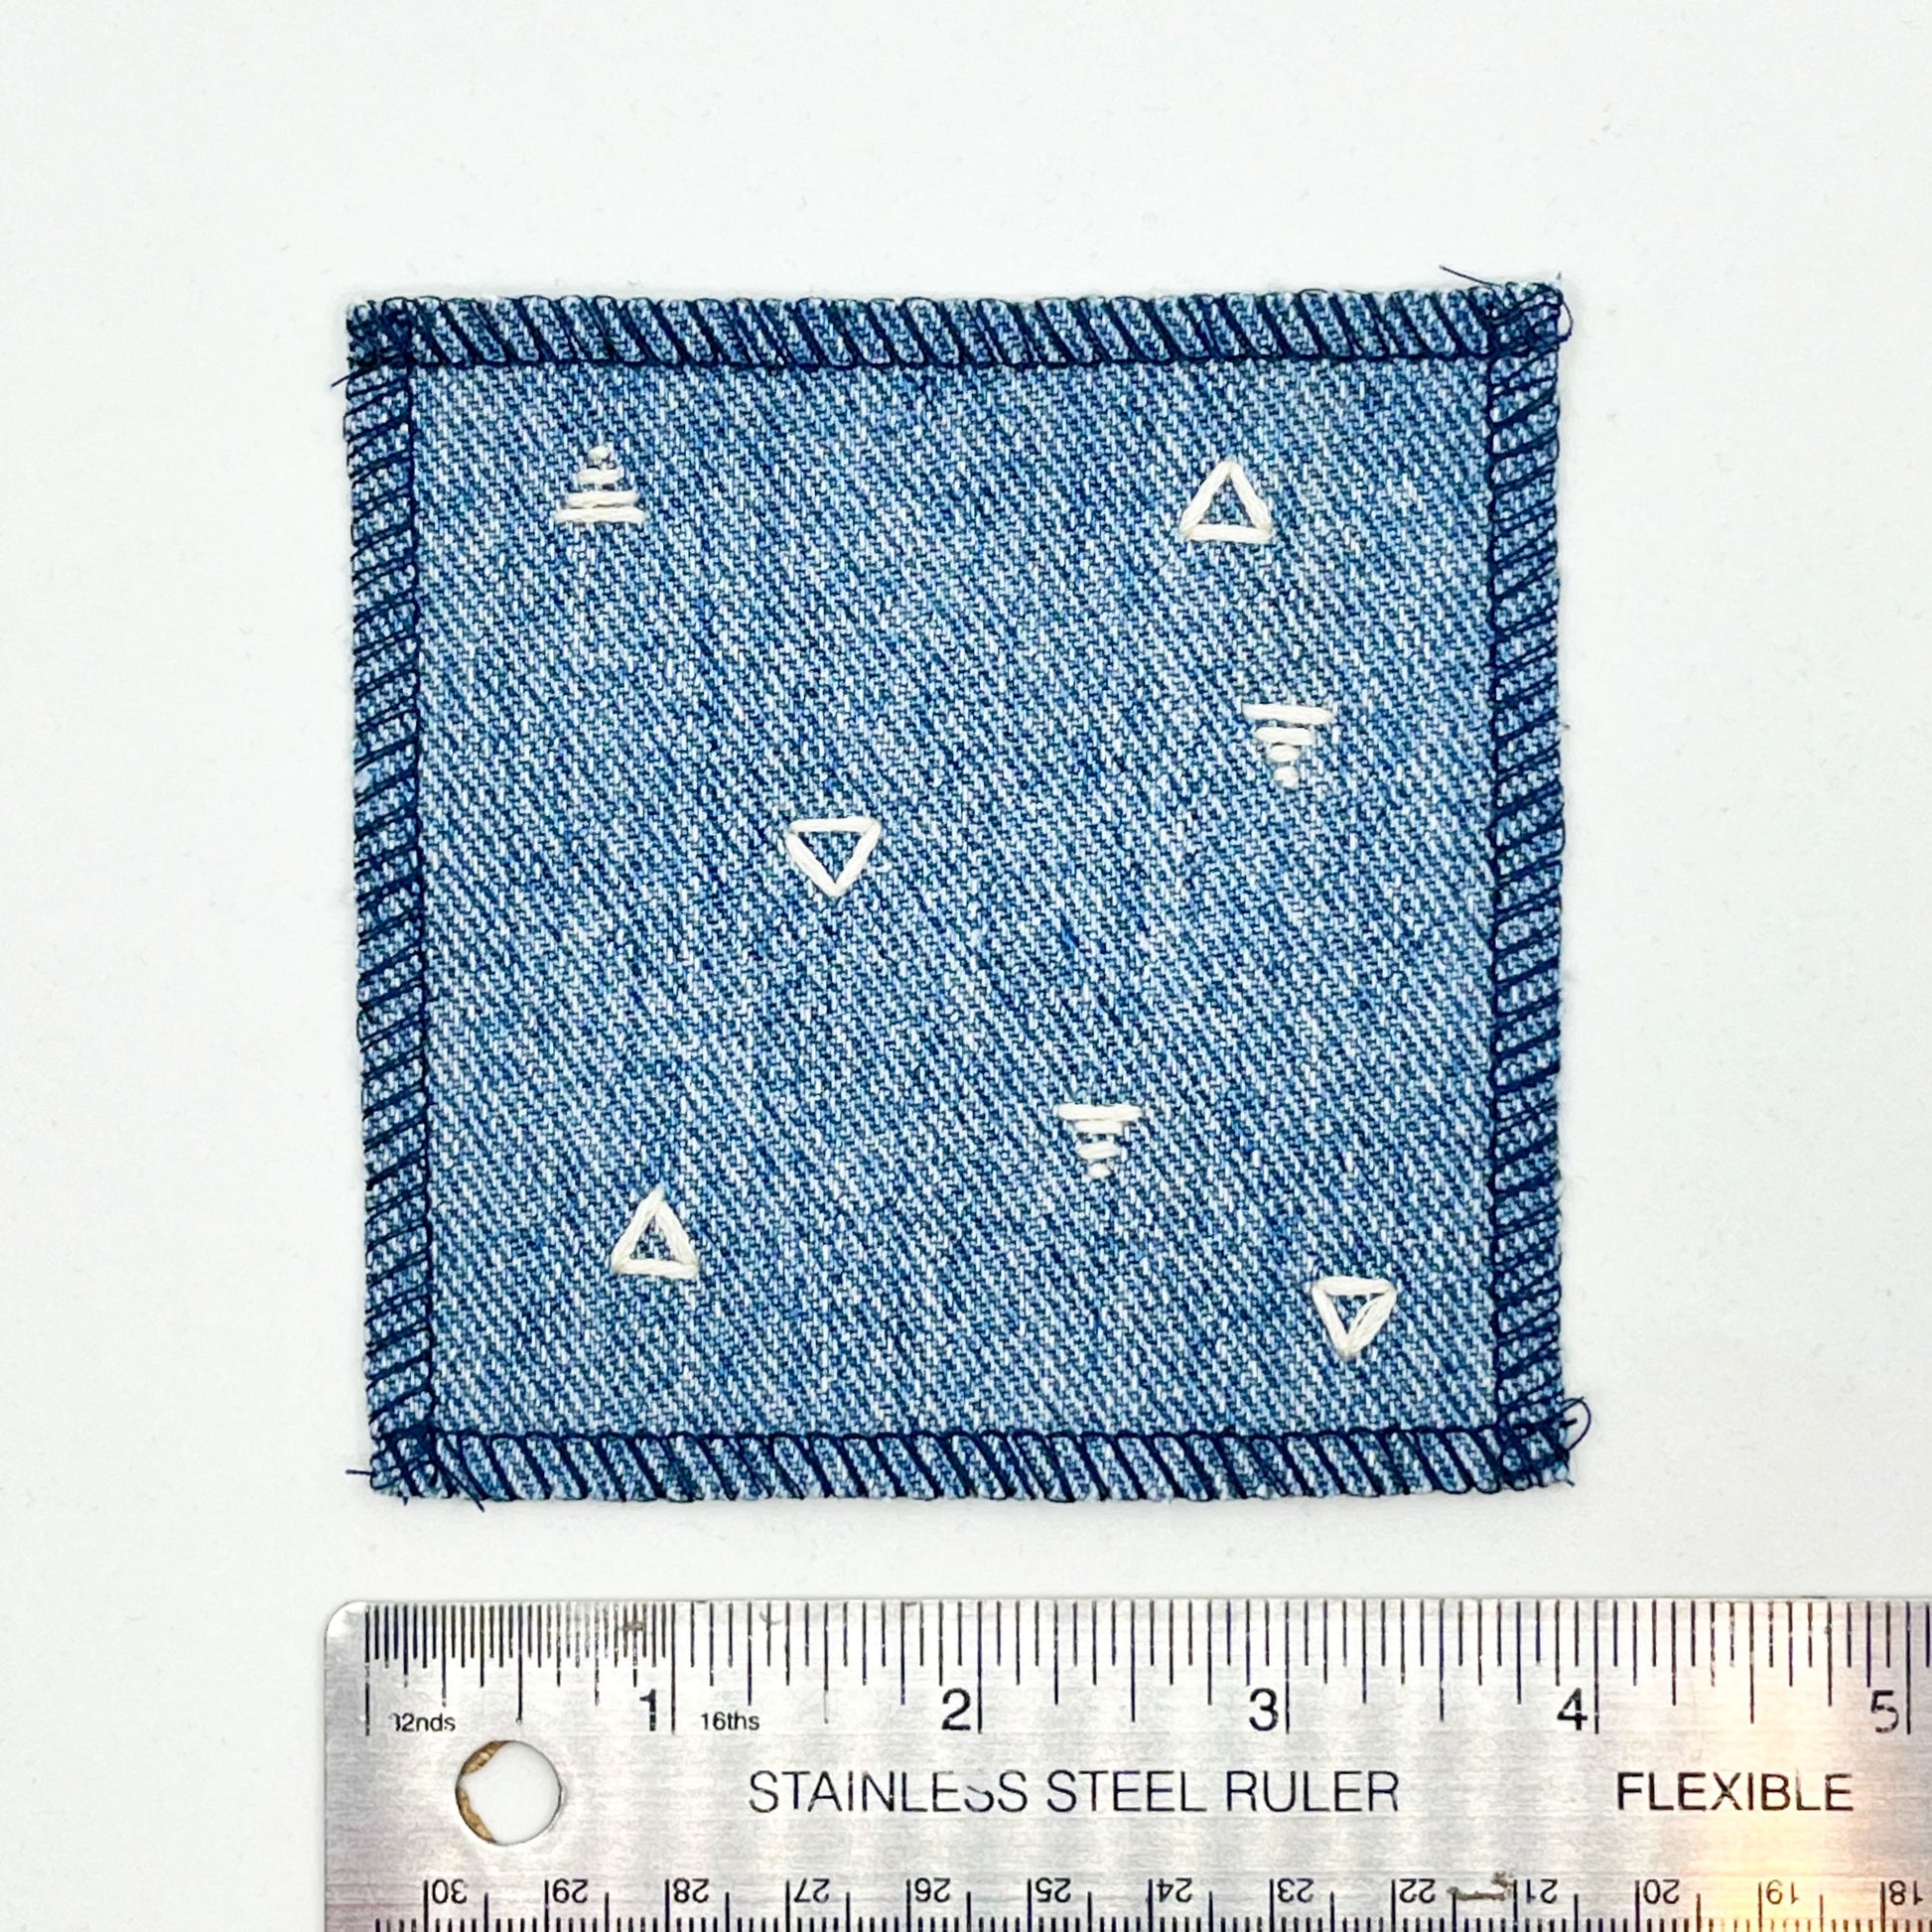 a square patch made out of denim, handstitched with scattered ivory triangles, some as outlines some with a line fill, with overlocked edges, on a white background, next to a ruler showing a width of 4 inches